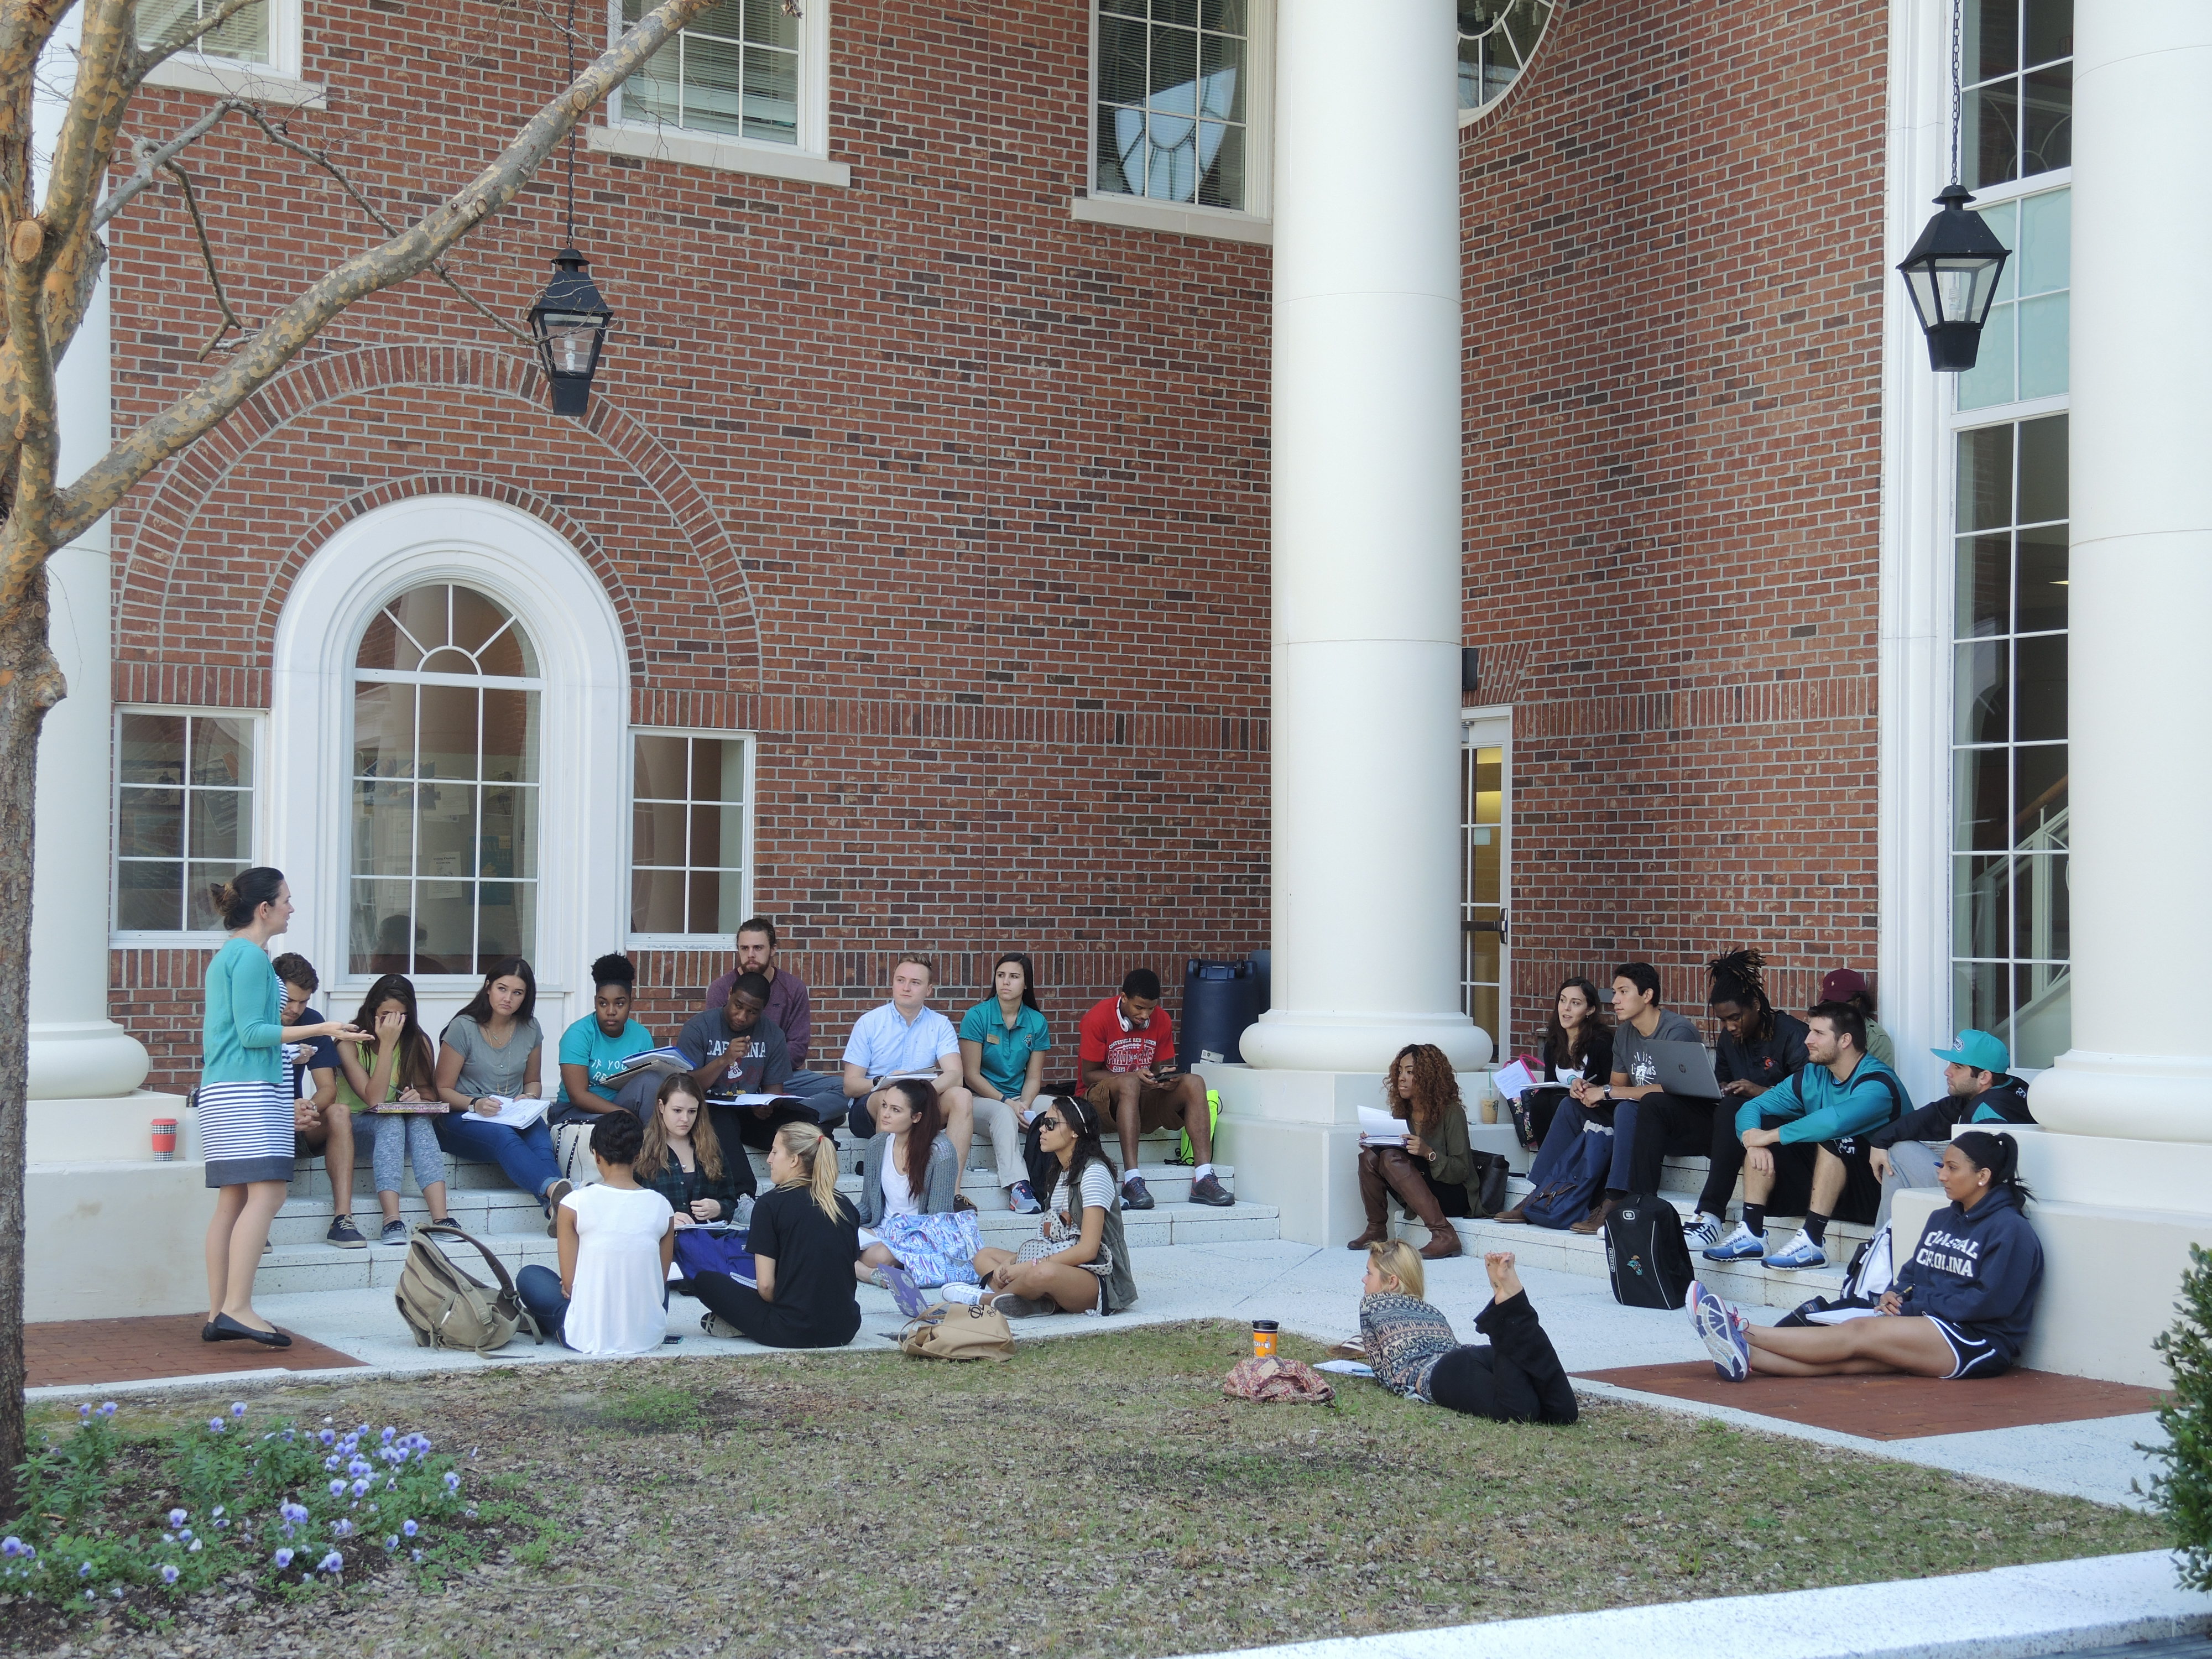 Edwards Courtyard is a popular place to hold an occasional class outdoors and that is what happened today (Photo by Jada Bynum).